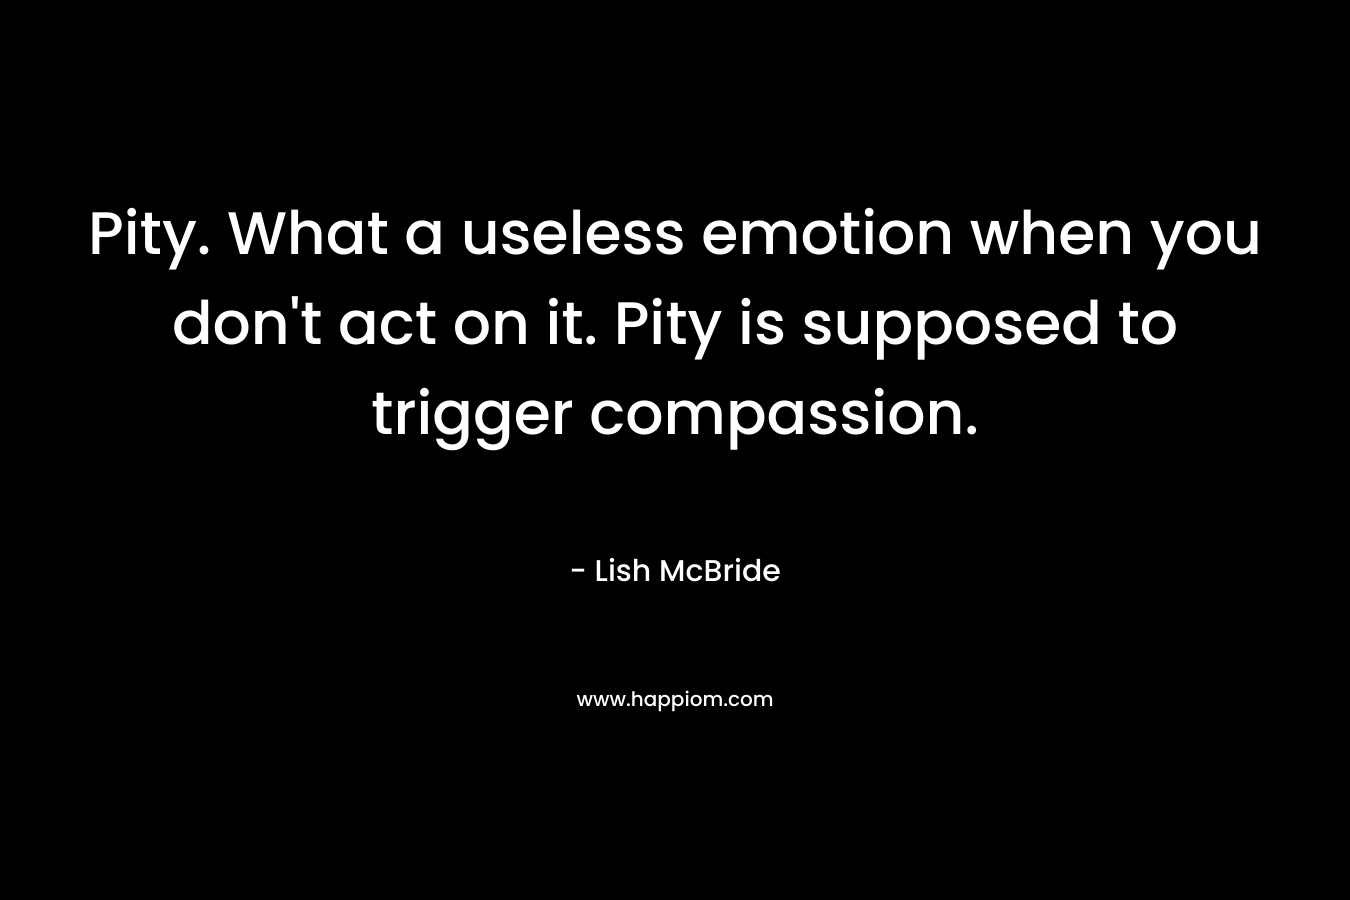 Pity. What a useless emotion when you don't act on it. Pity is supposed to trigger compassion.